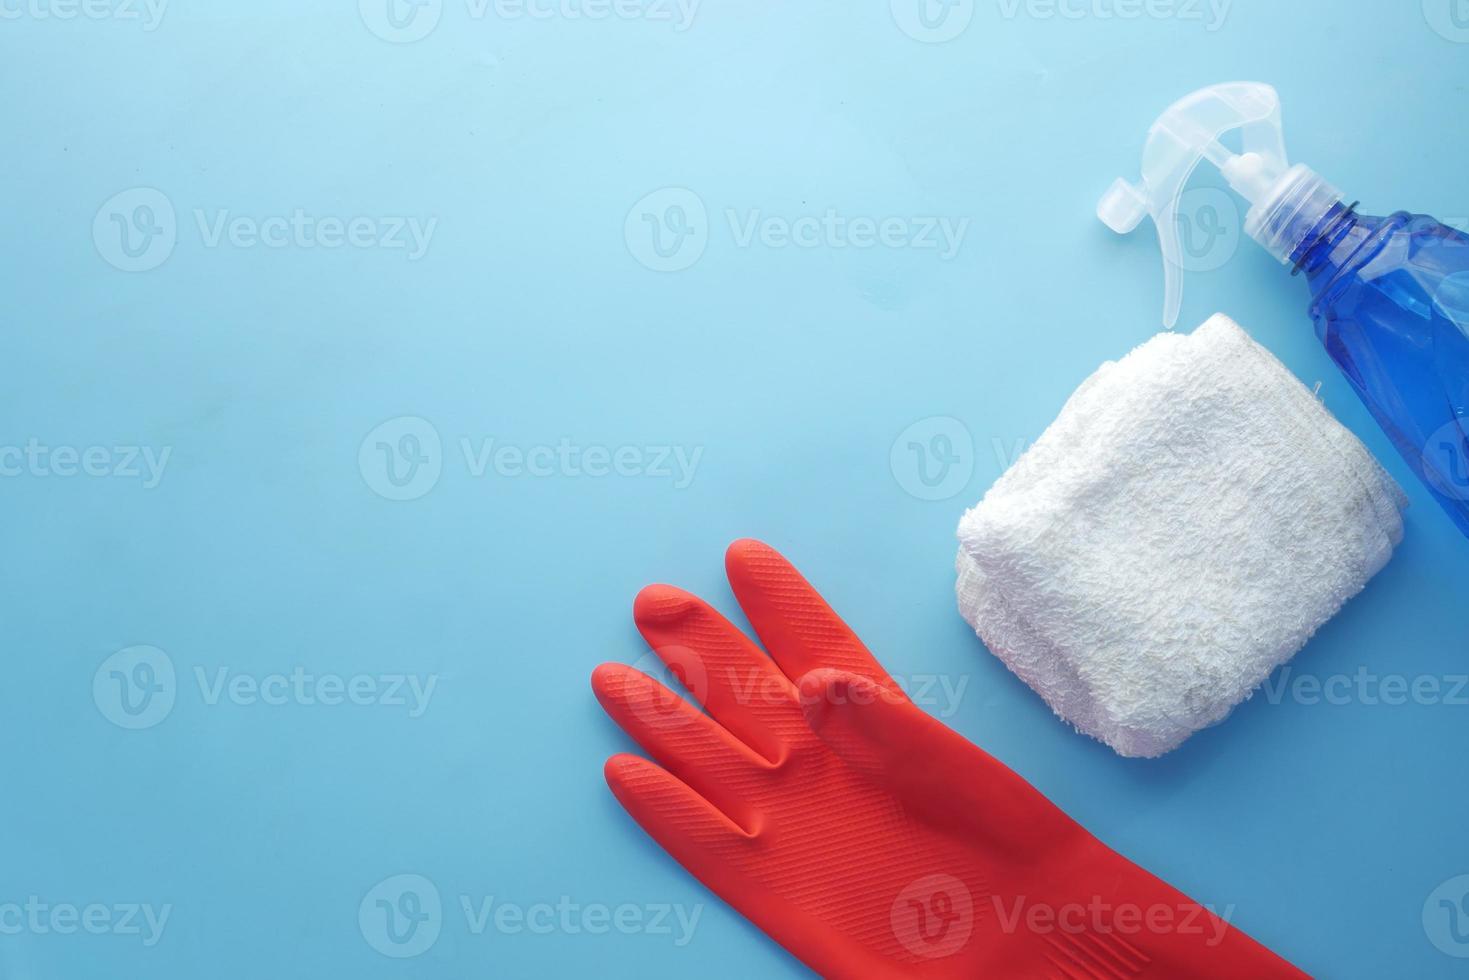 Spray bottle and cleaning cloth on table photo